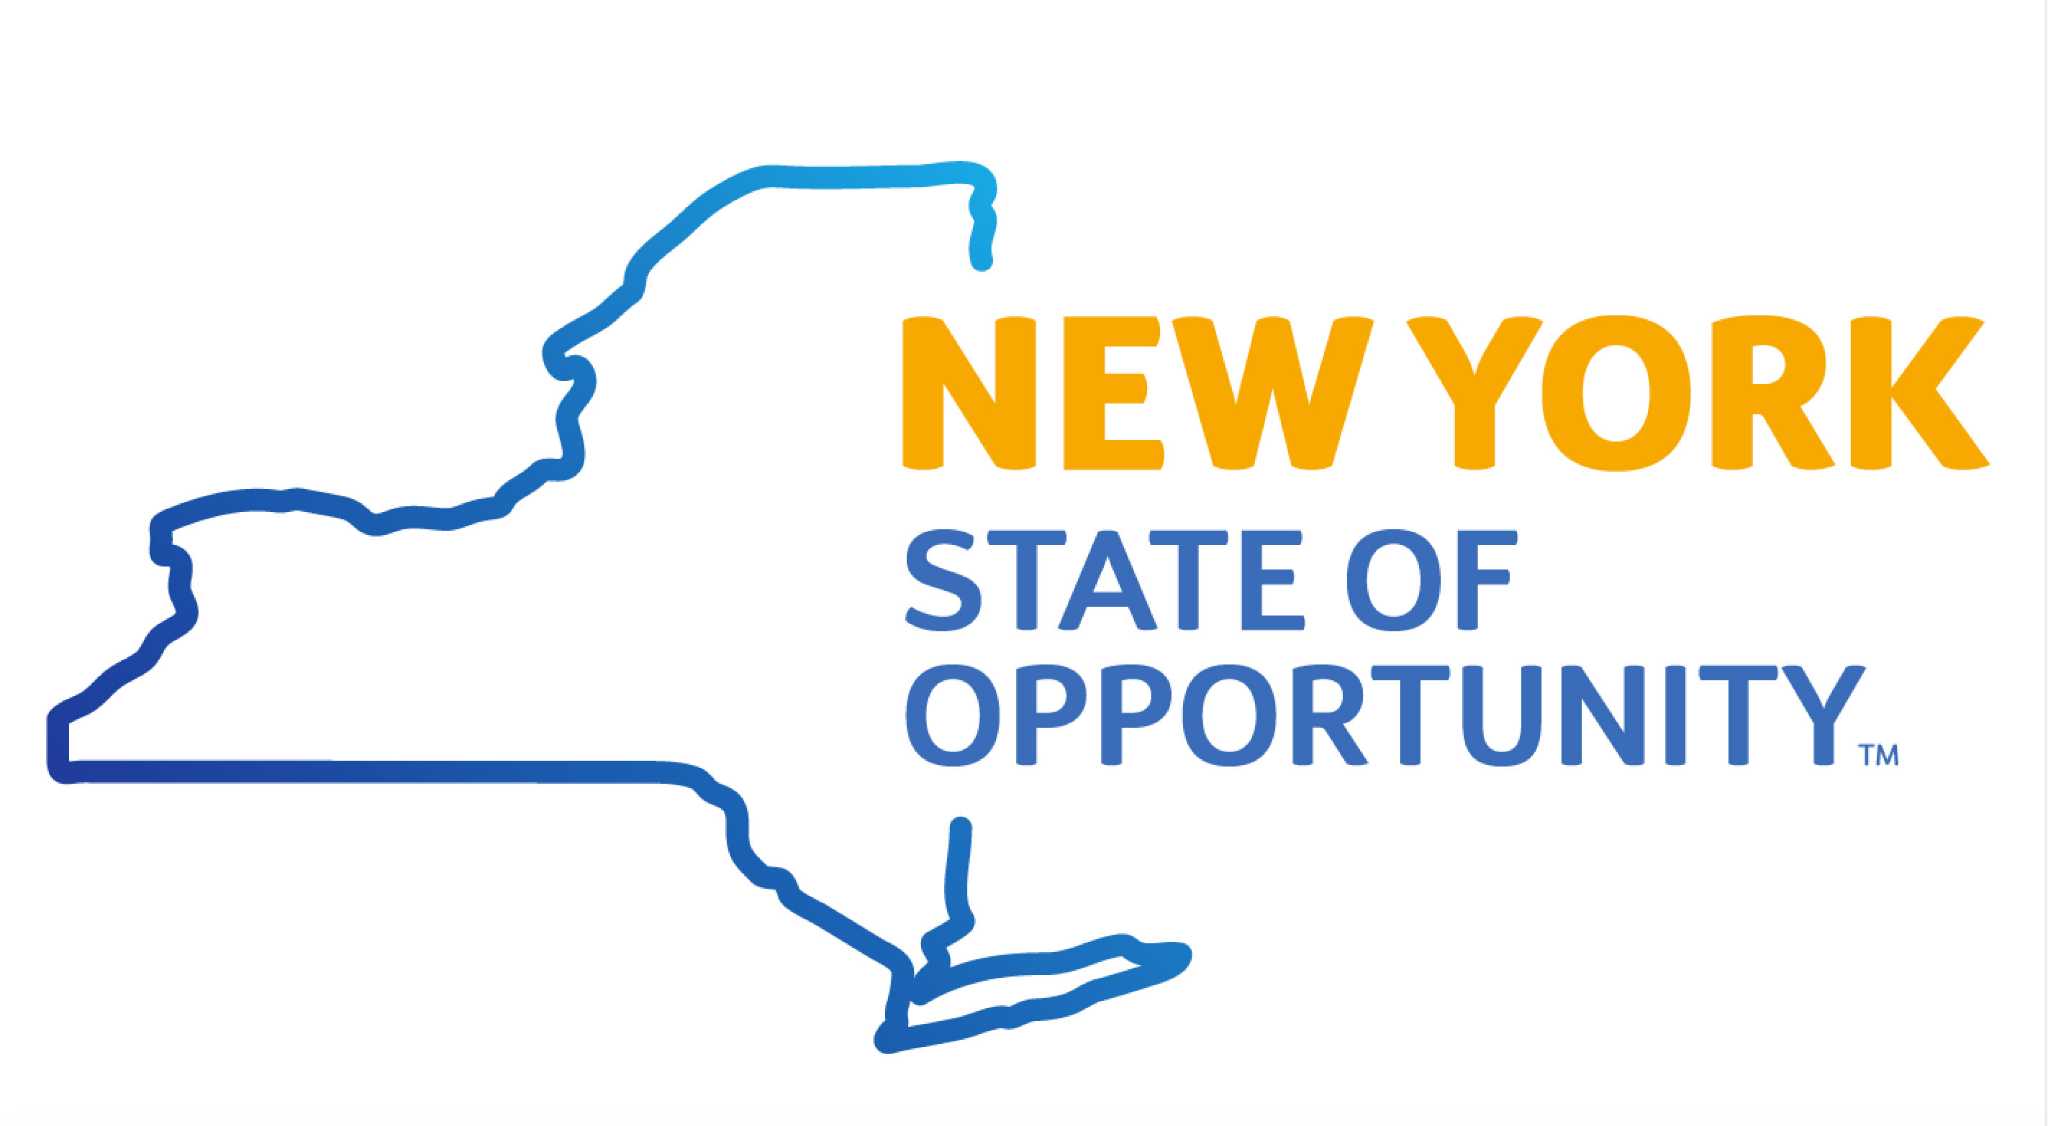 New York jumps on 'brandwagon' with 'State of Opportunity'